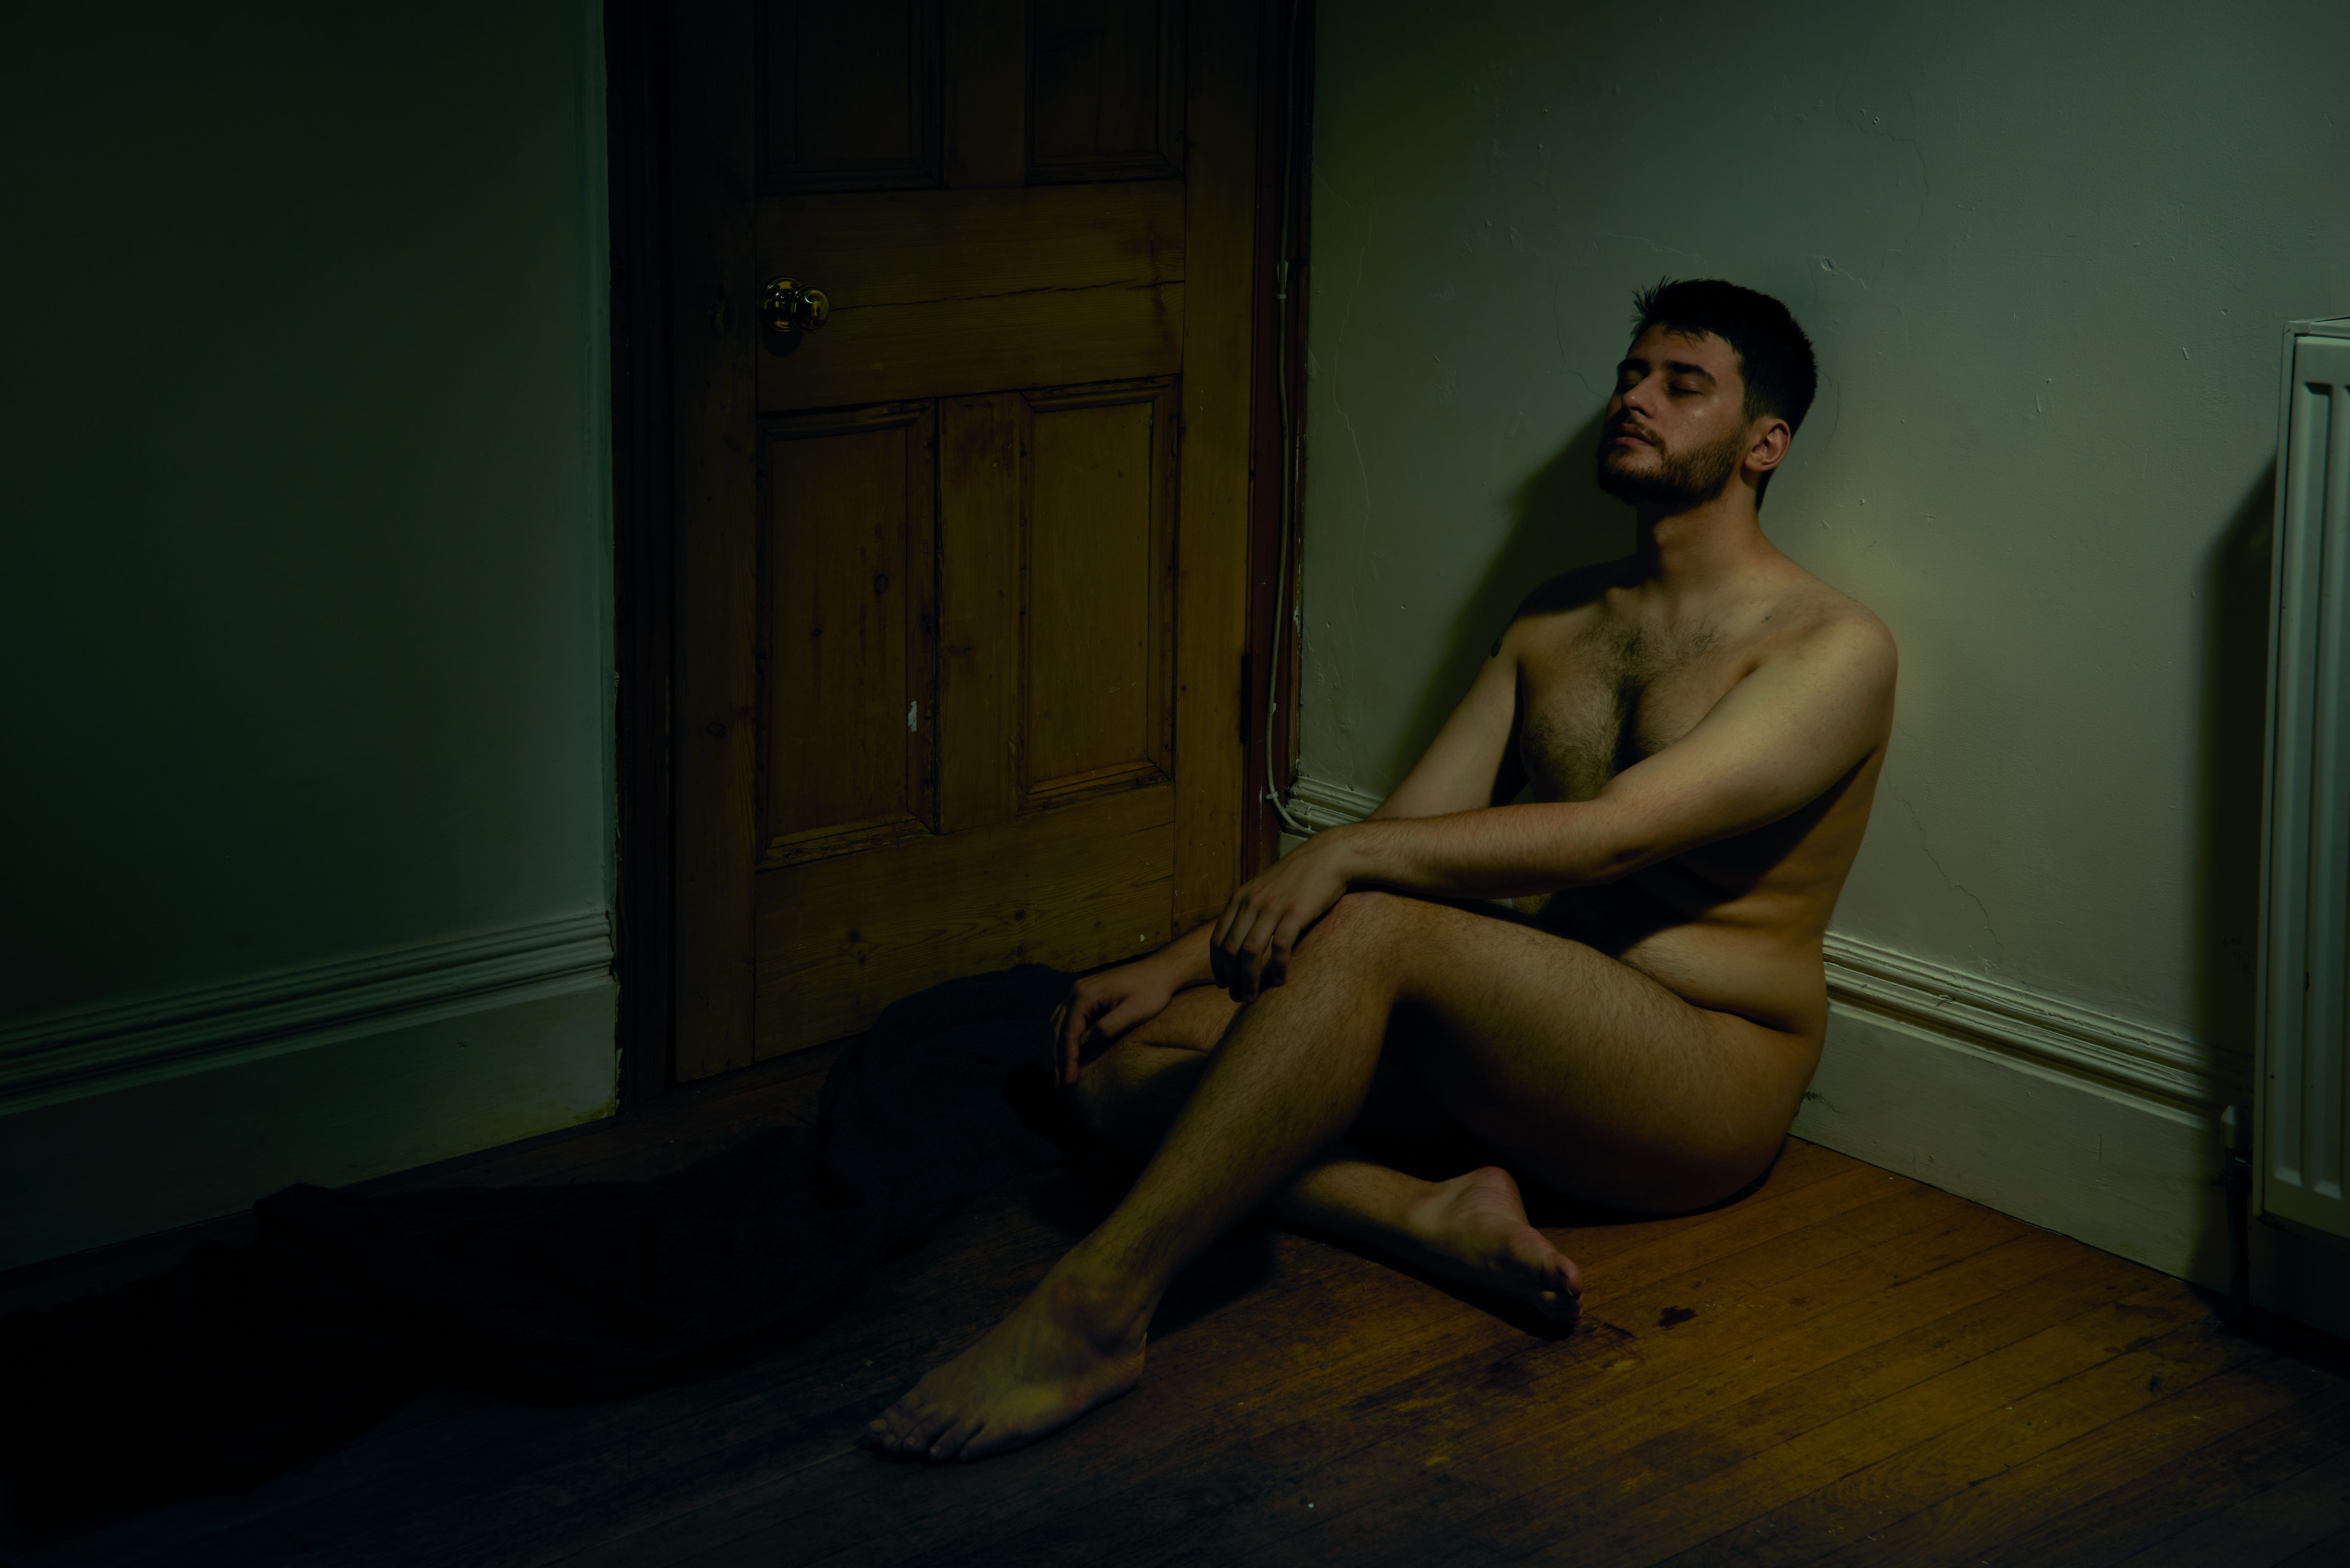 Body positivity photoshoot with Volkan, with a colostomization bag, by JC Candanedo. Interview by KODAKOne.